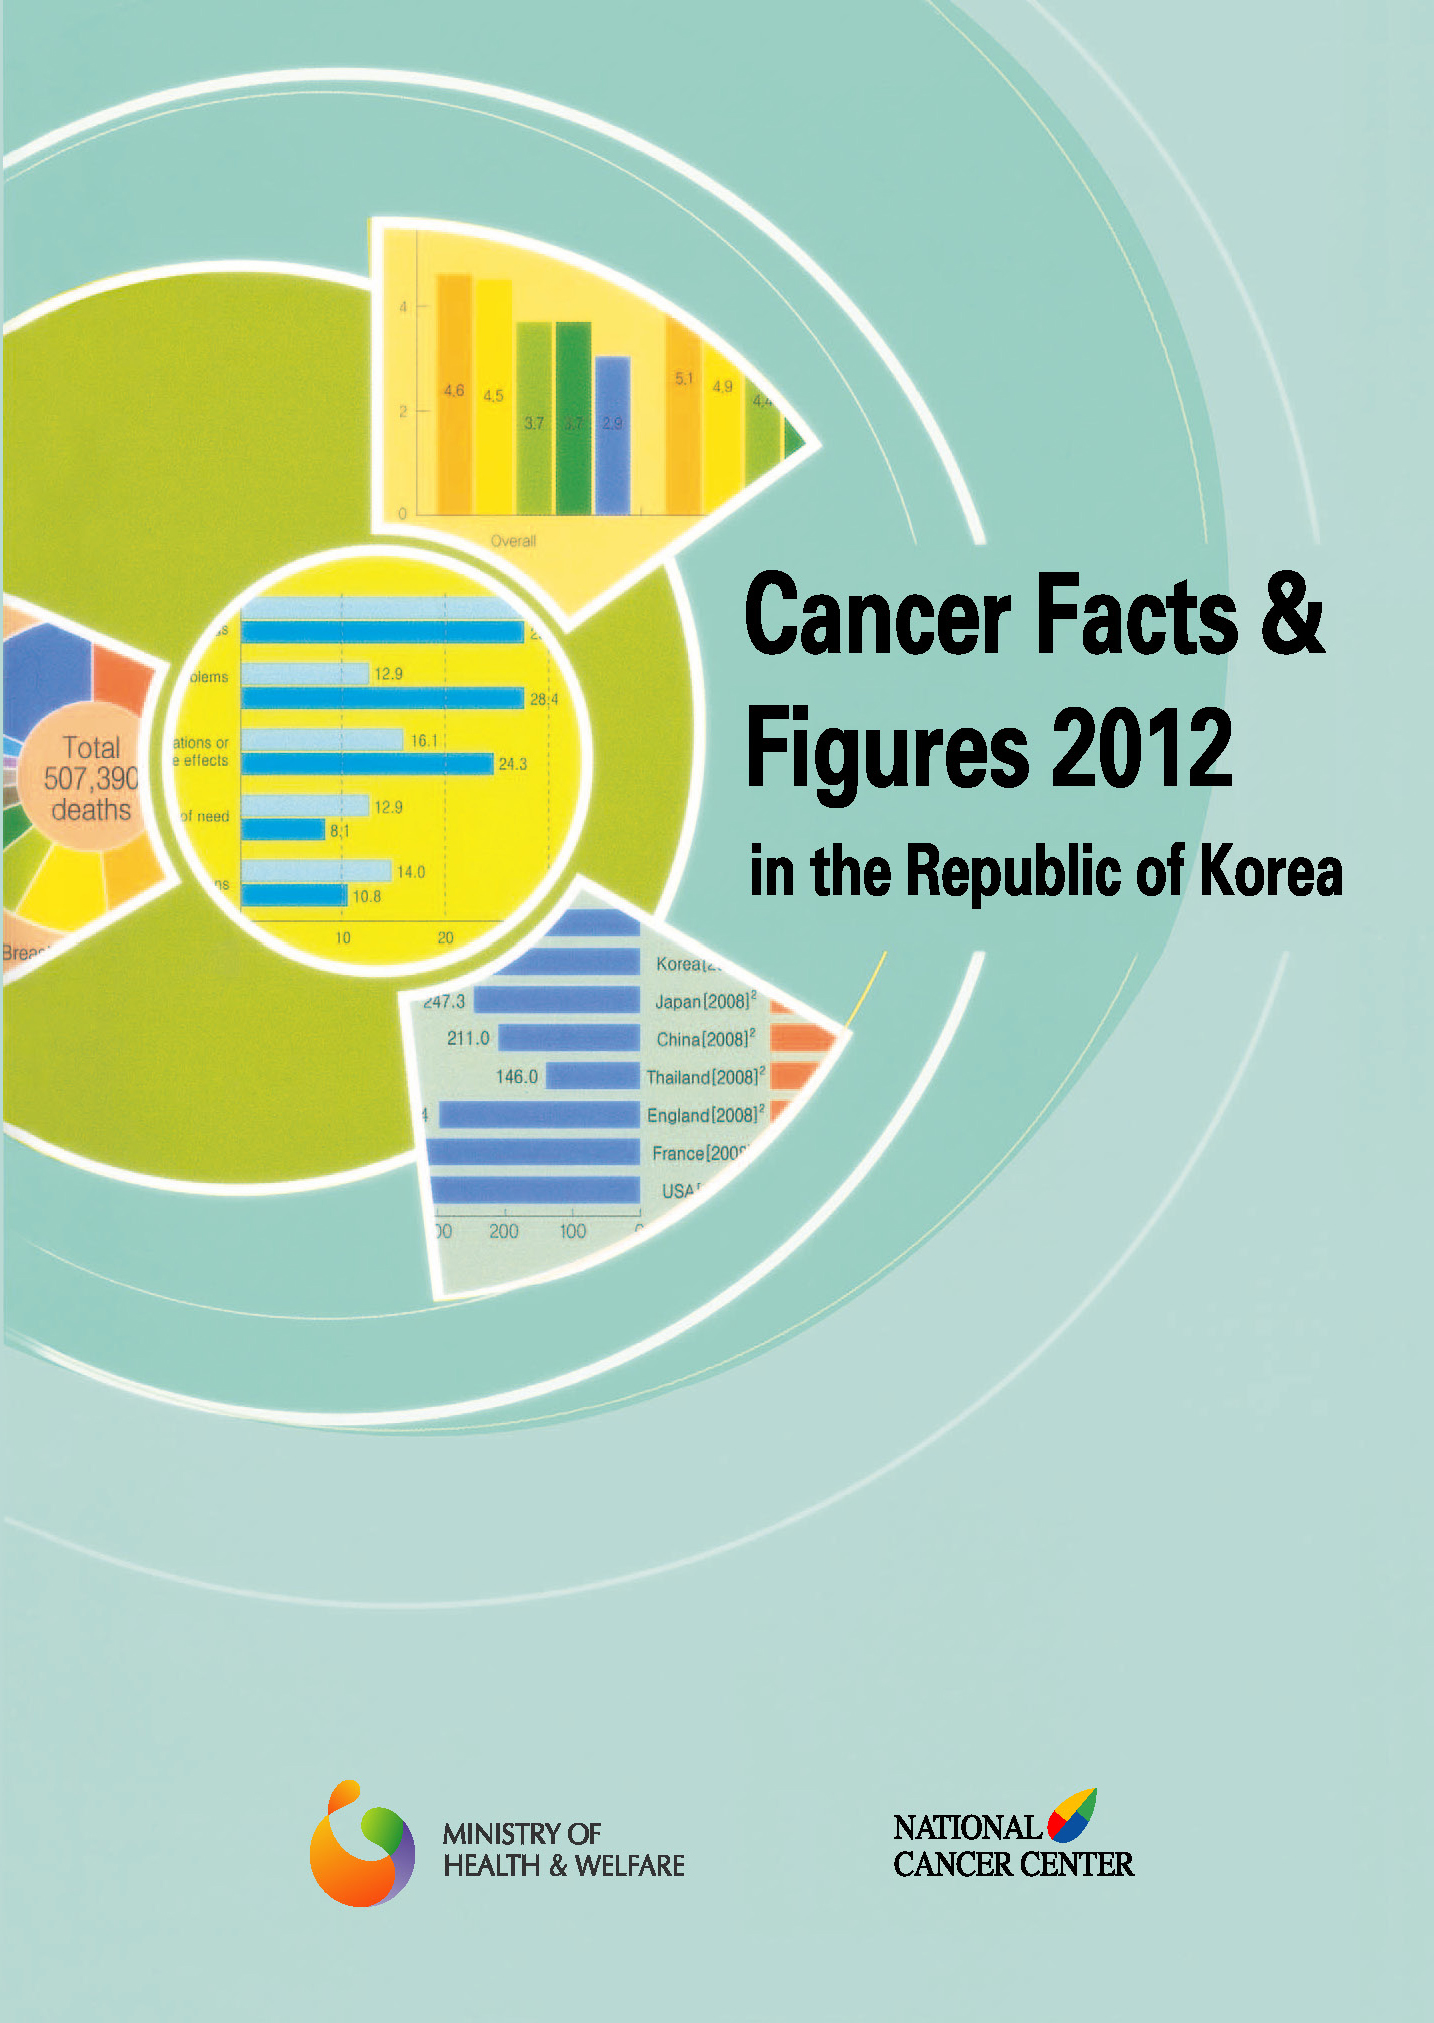 Cancer Facts & Figures 2012